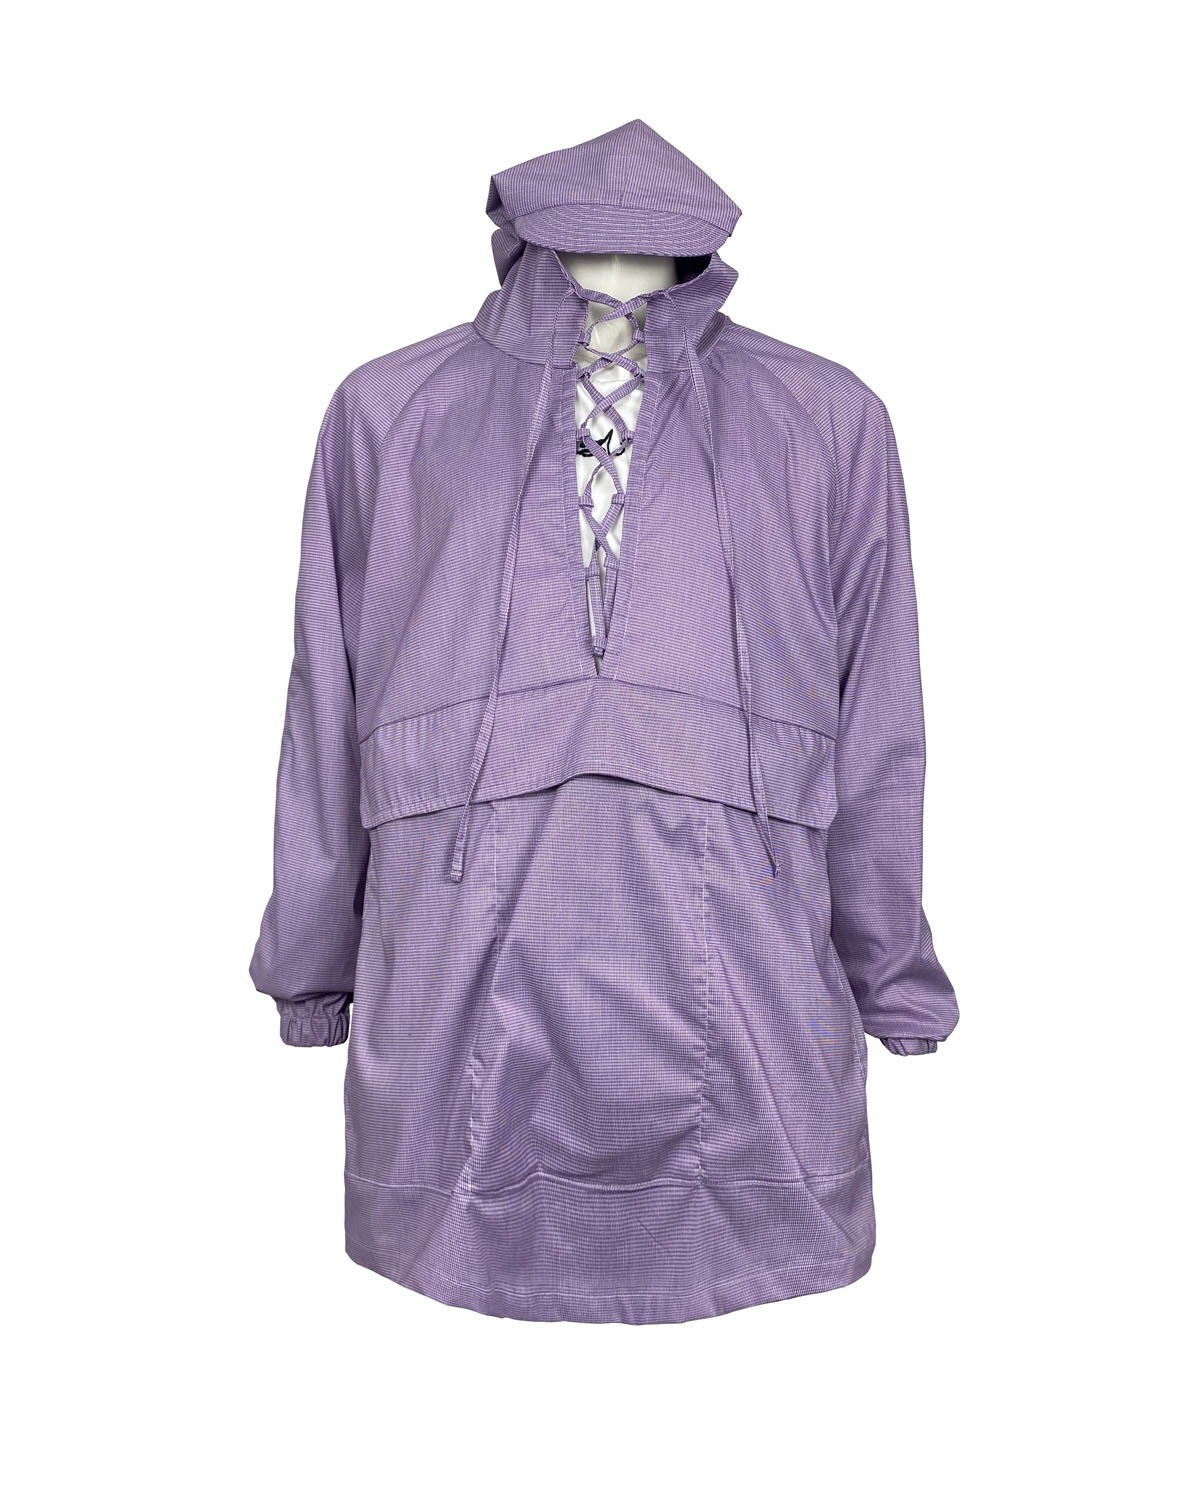 lace-up anorak_PP  192.000₩→58,000₩